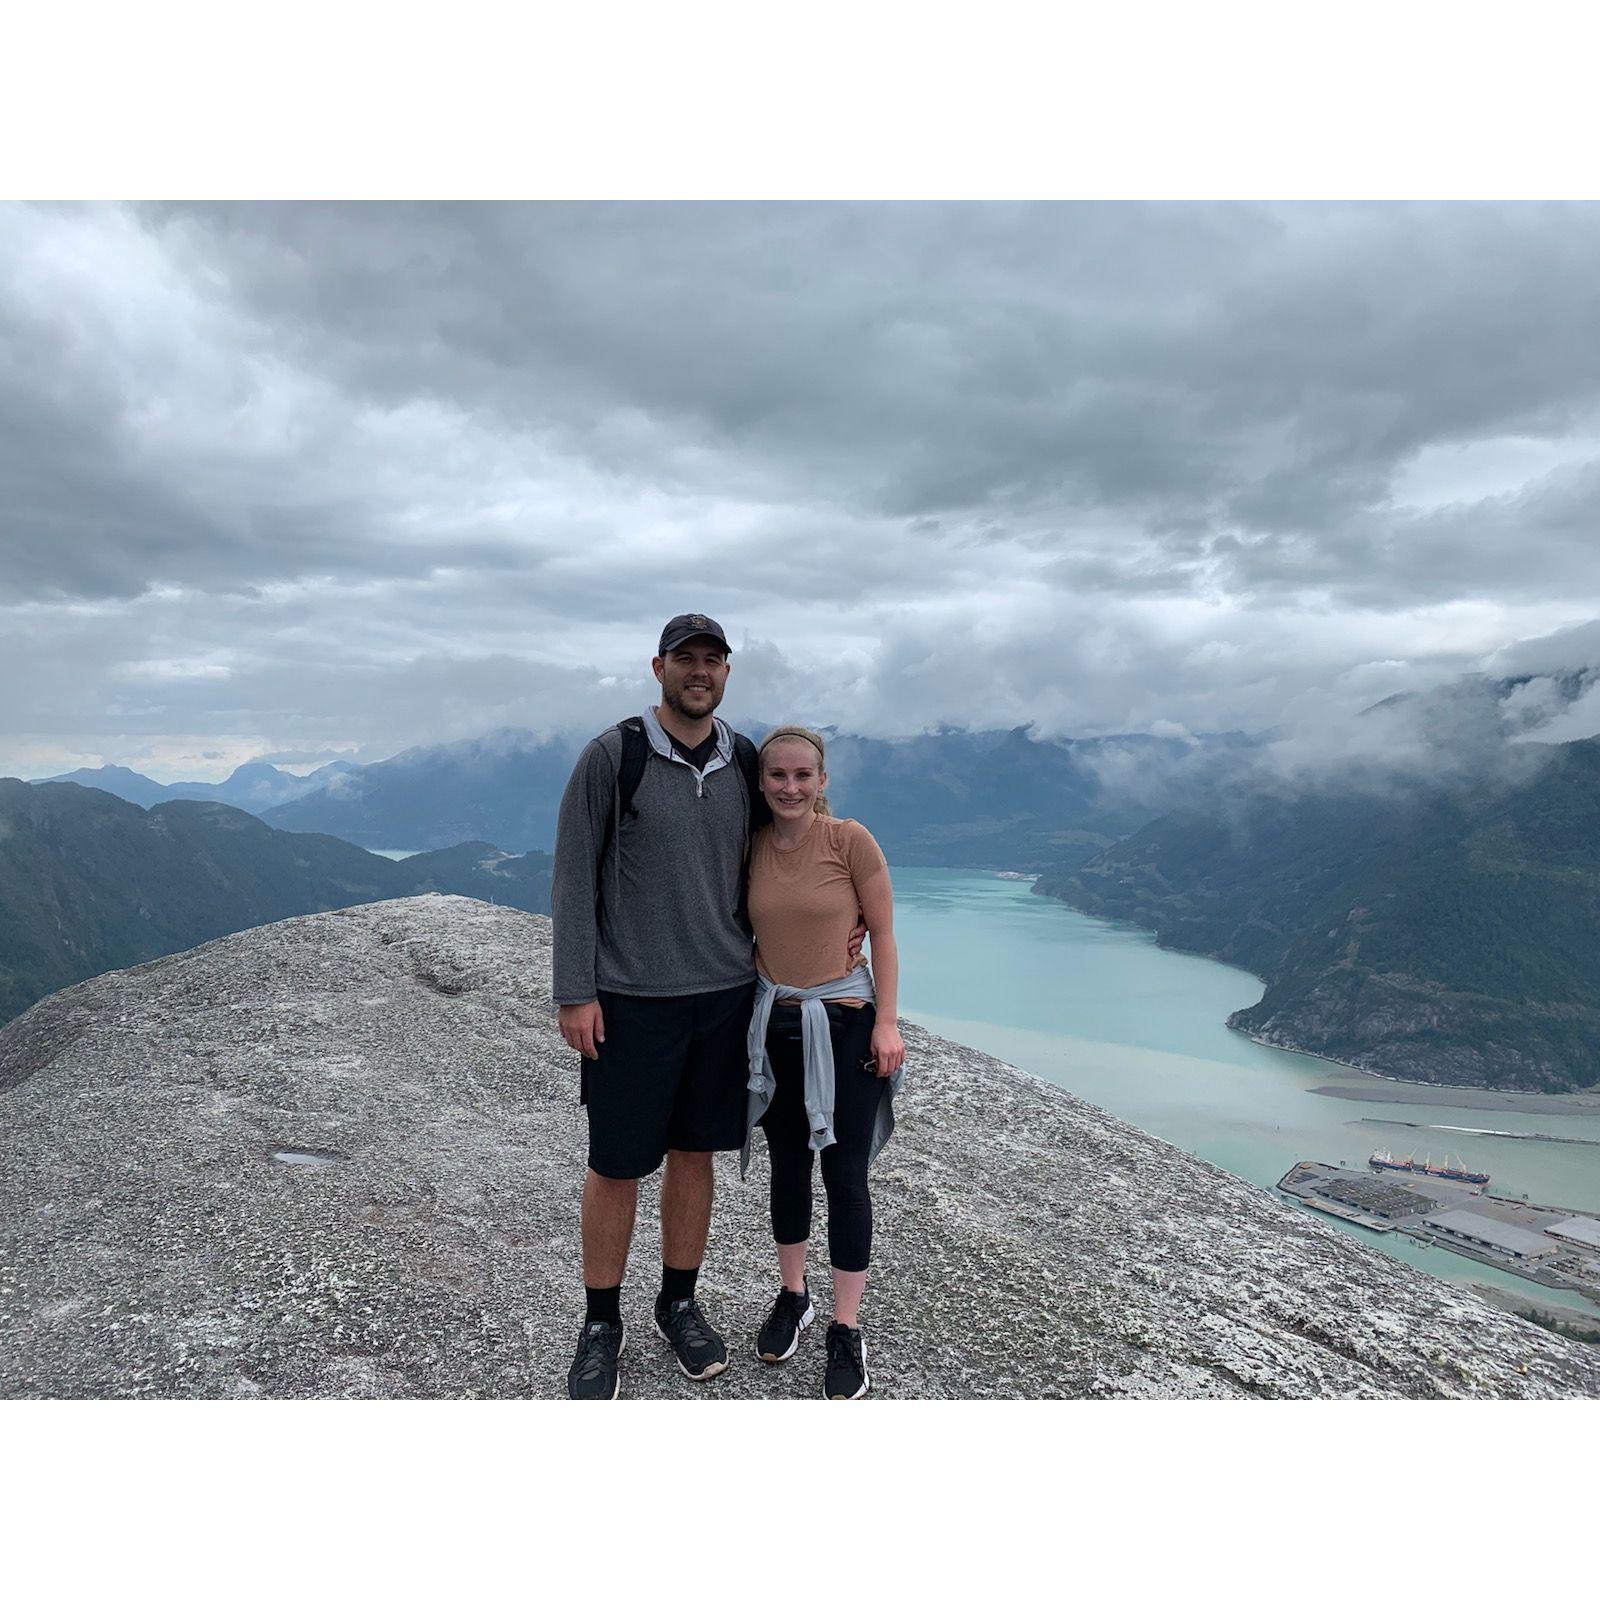 At the top of the Stawamus Chief in British Columbia.